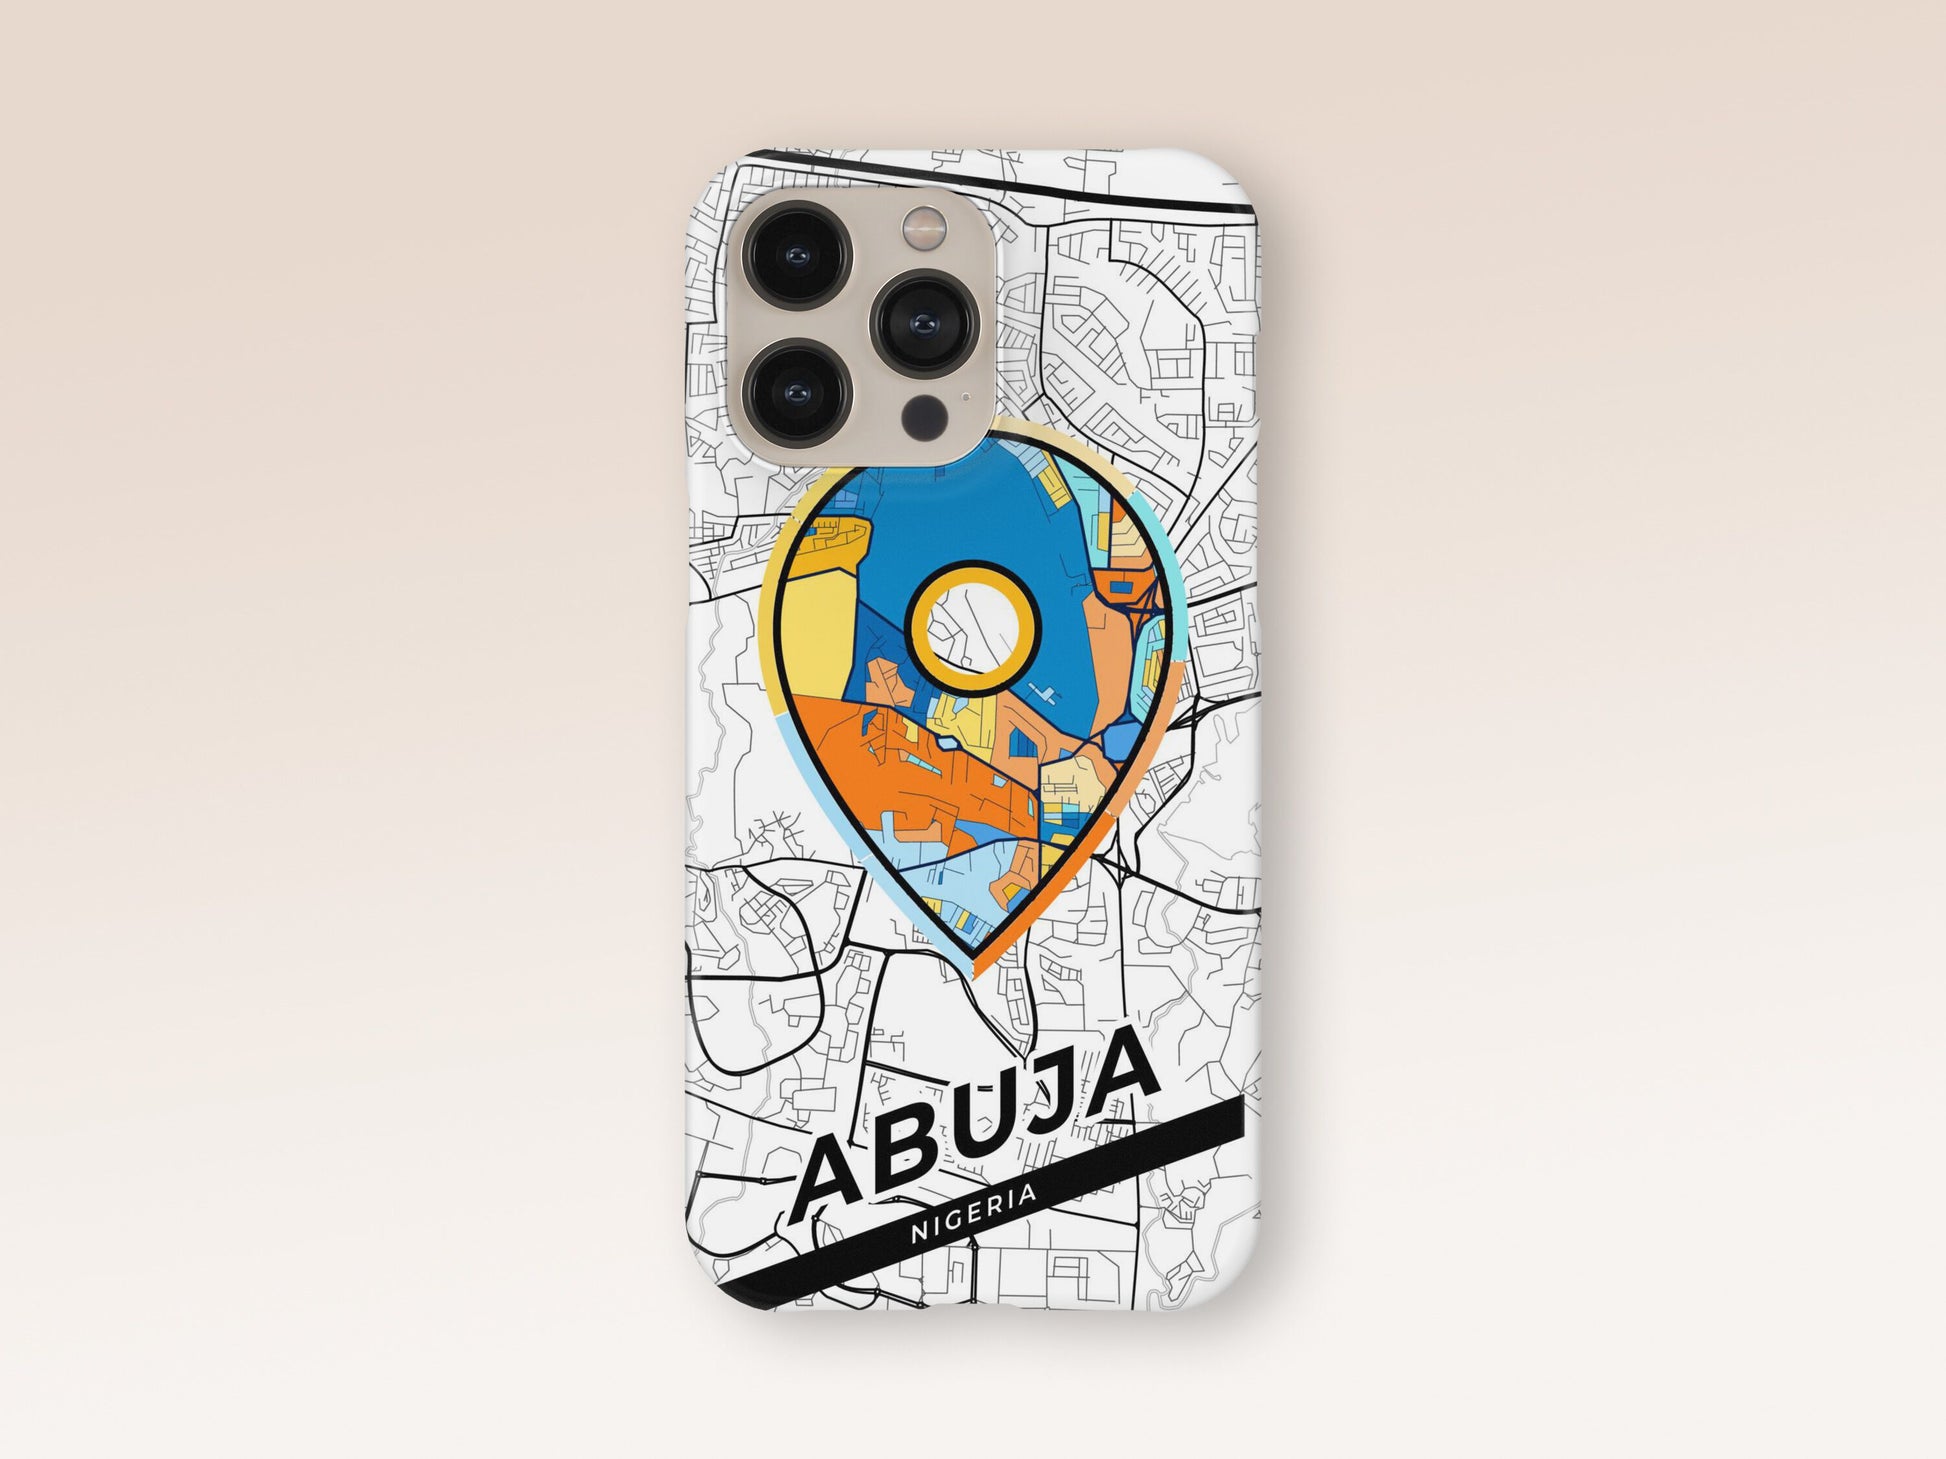 Abuja Nigeria slim phone case with colorful icon. Birthday, wedding or housewarming gift. Couple match cases. 1